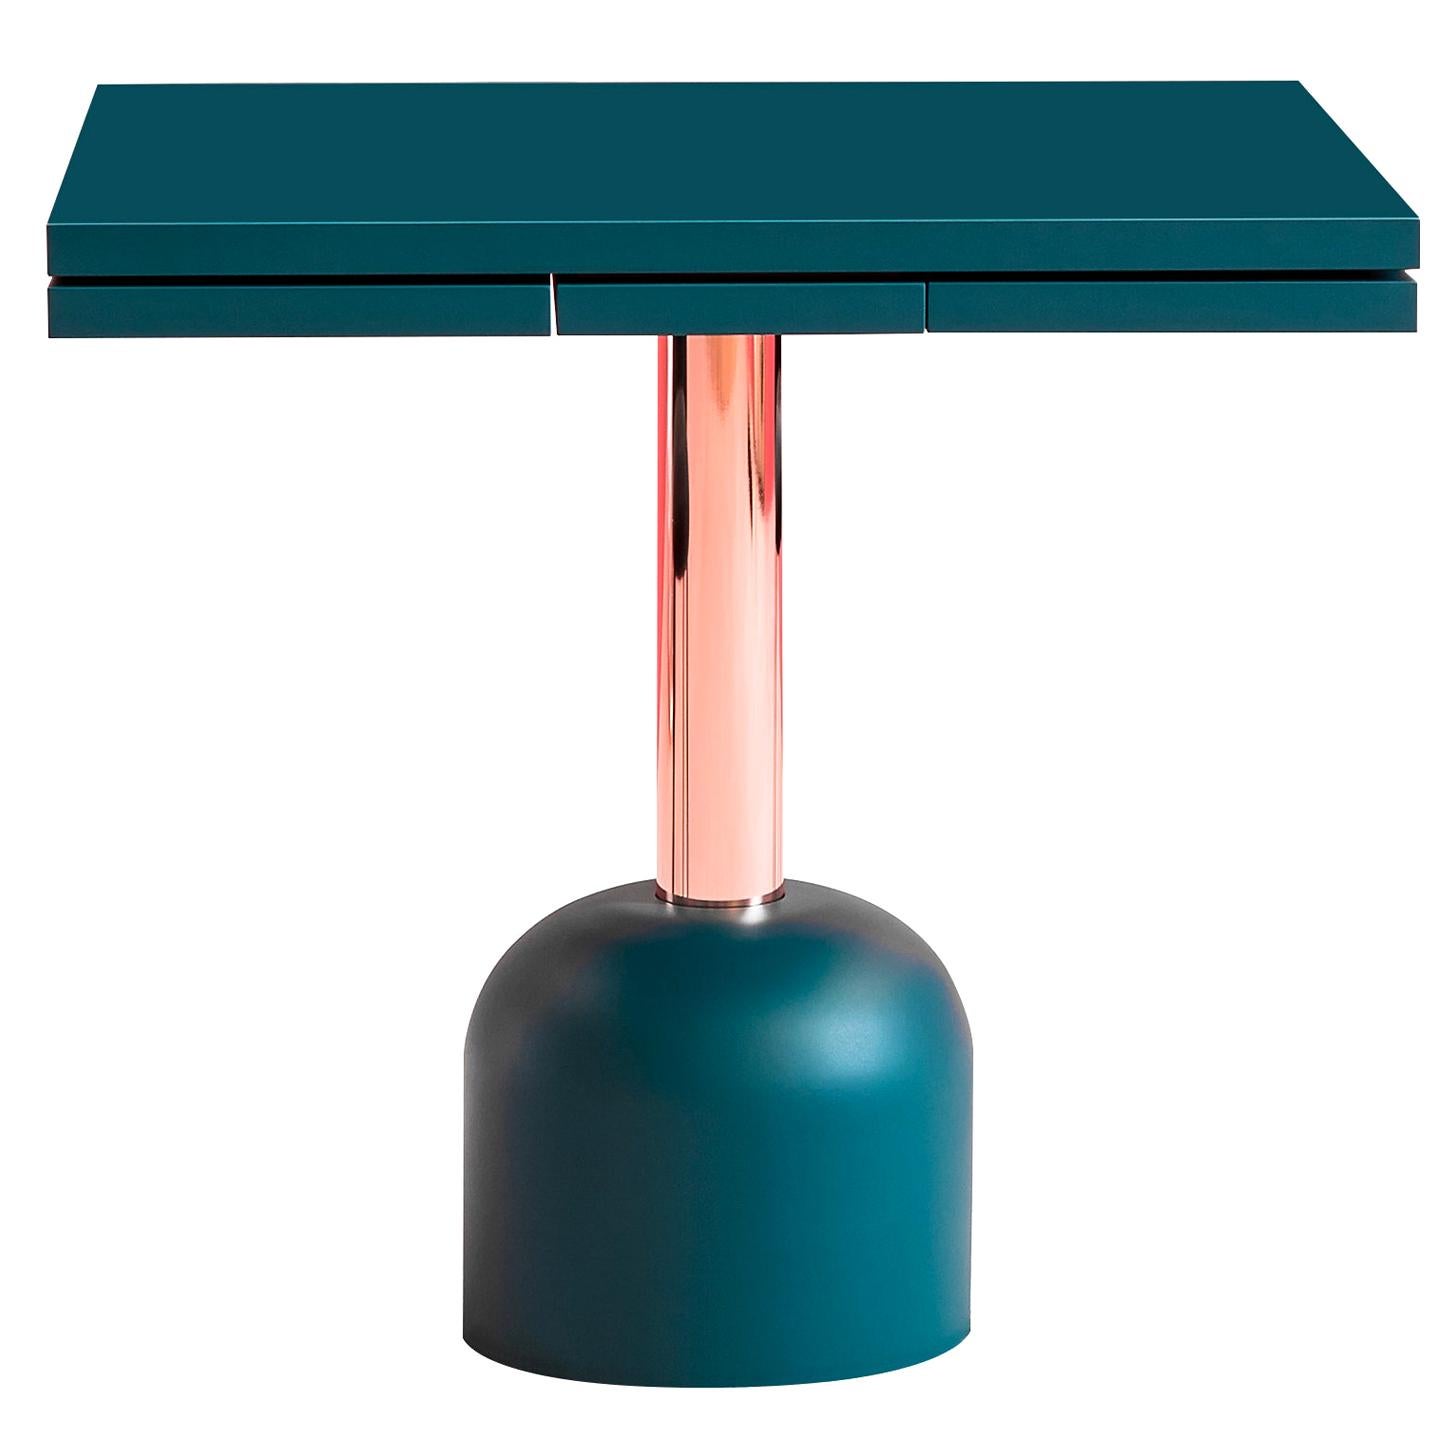 For Sale: Green (Veronese Green NCS S-5040 B-50G) Illo Plus Table with Copper Column by Miniforms Lab